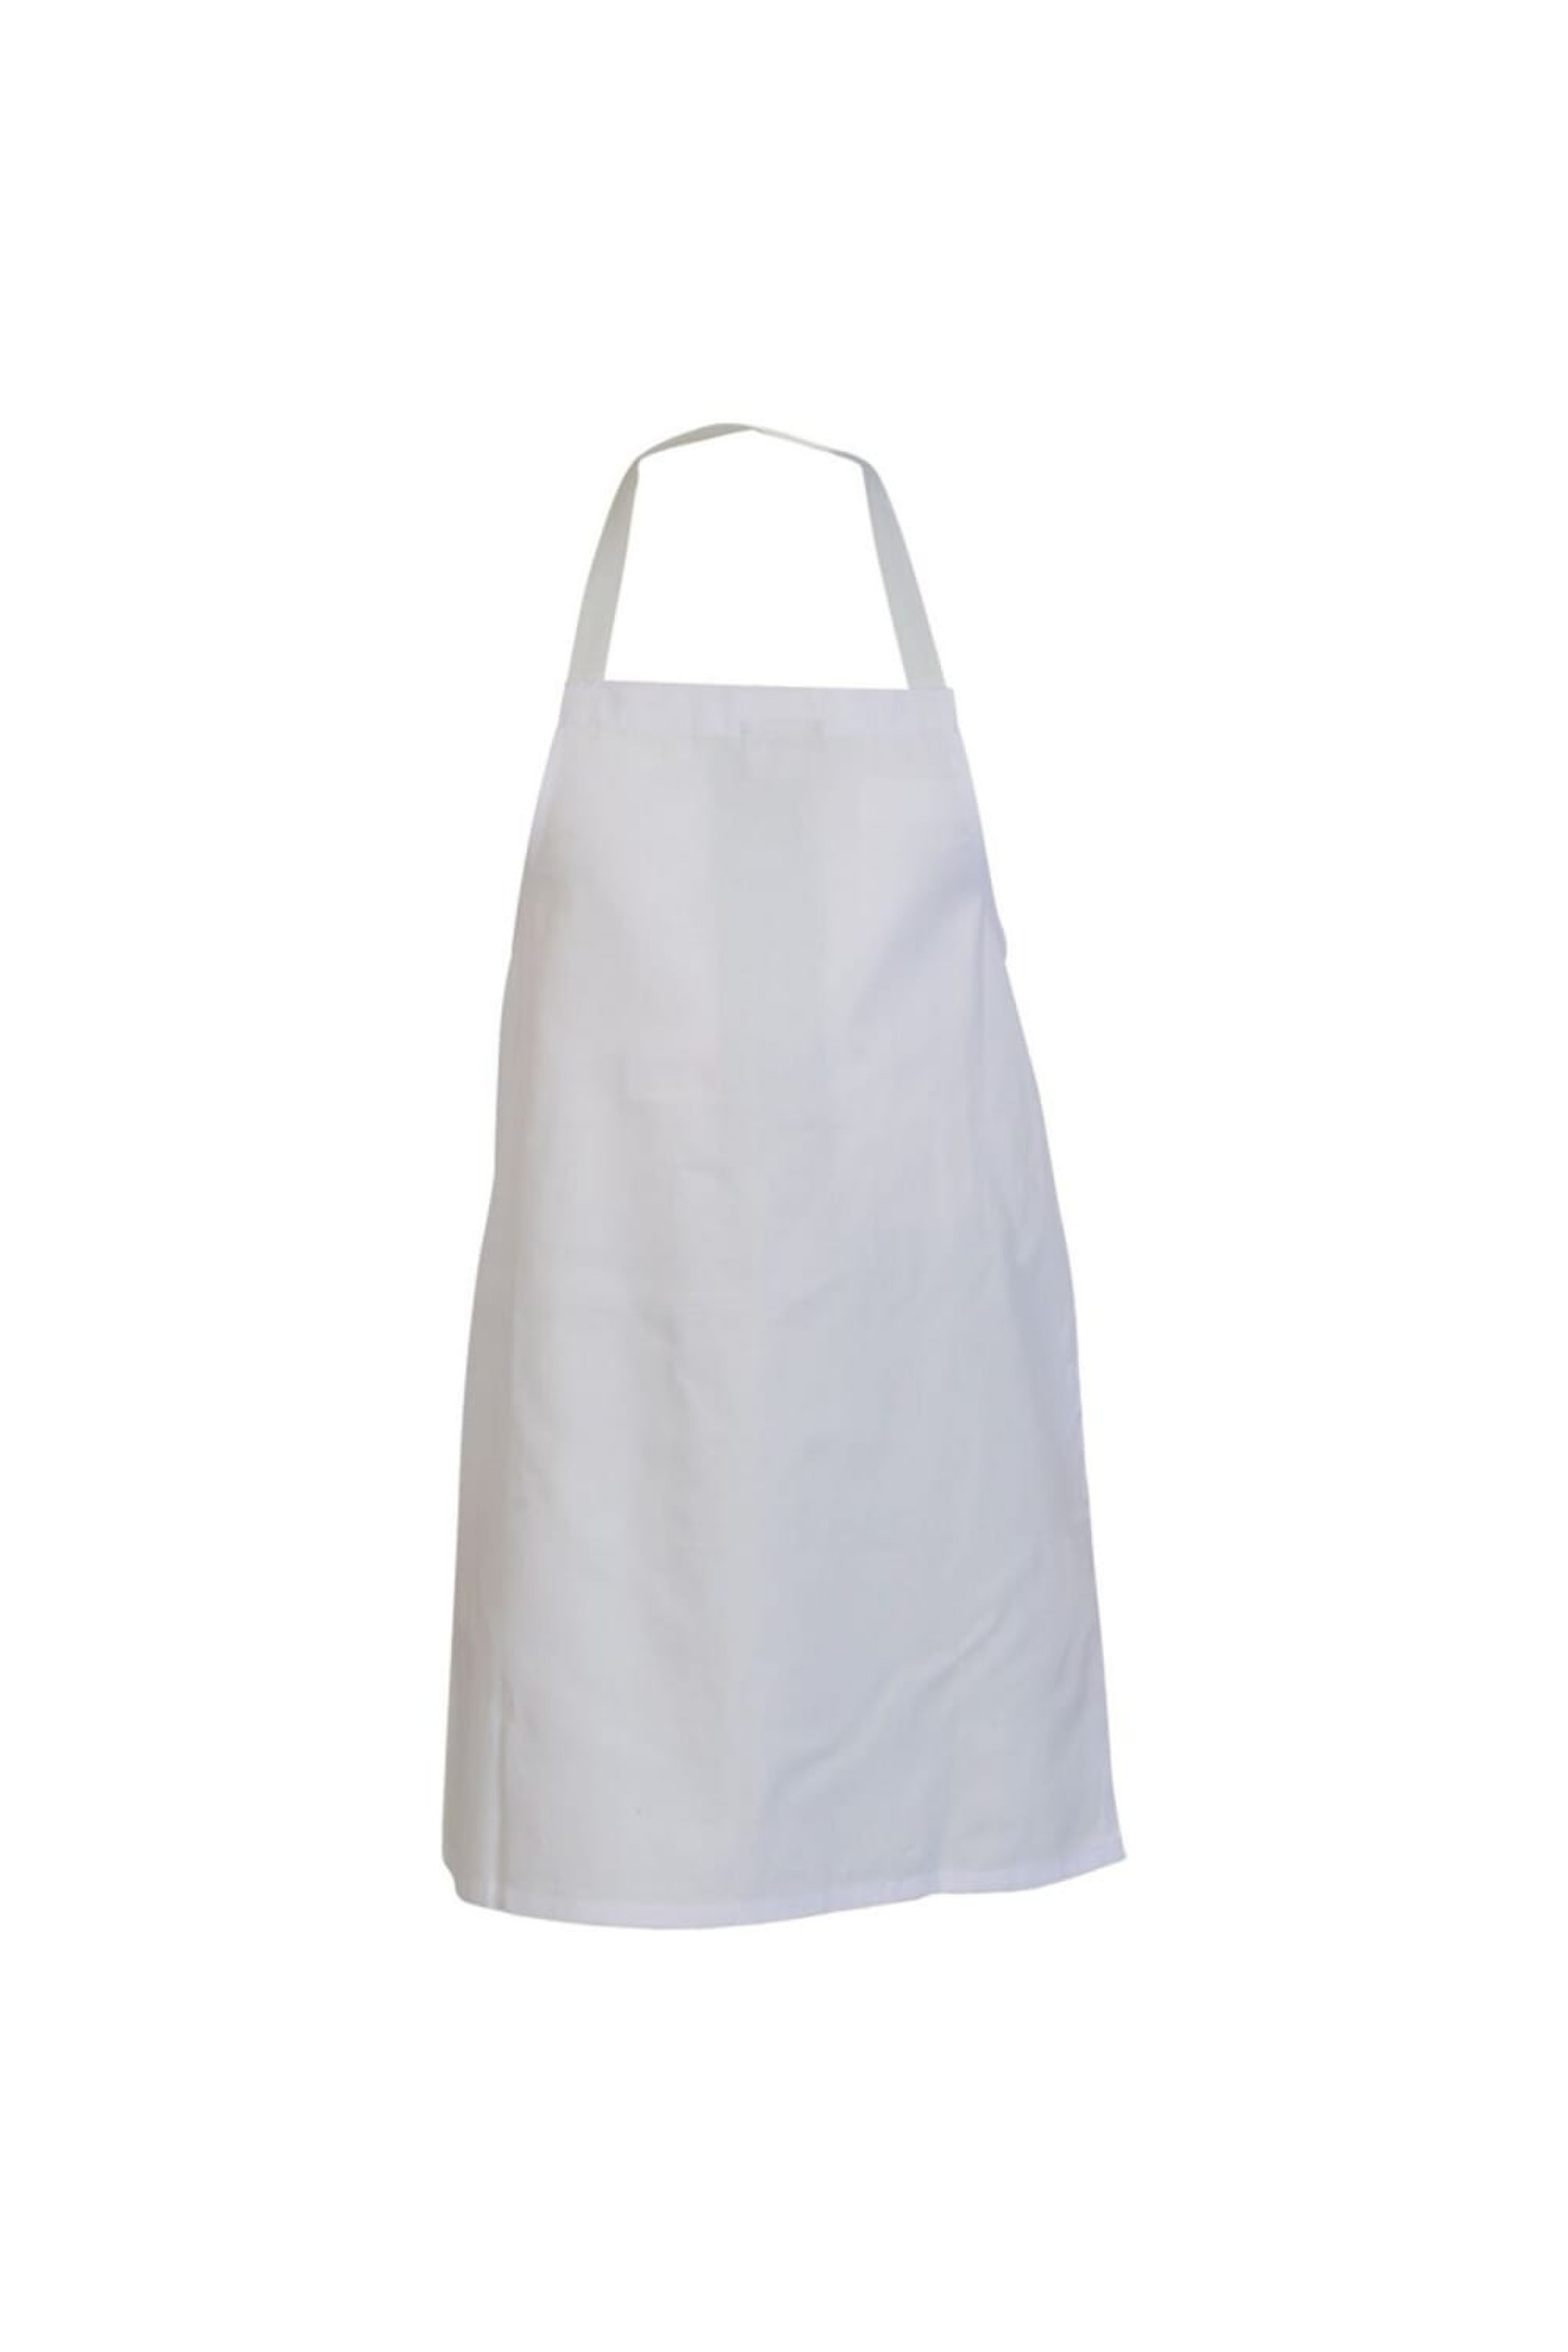 ABSOLUTE APPAREL ABSOLUTE APPAREL ADULTS WORKWEAR FULL LENGTH APRON IN WHITE